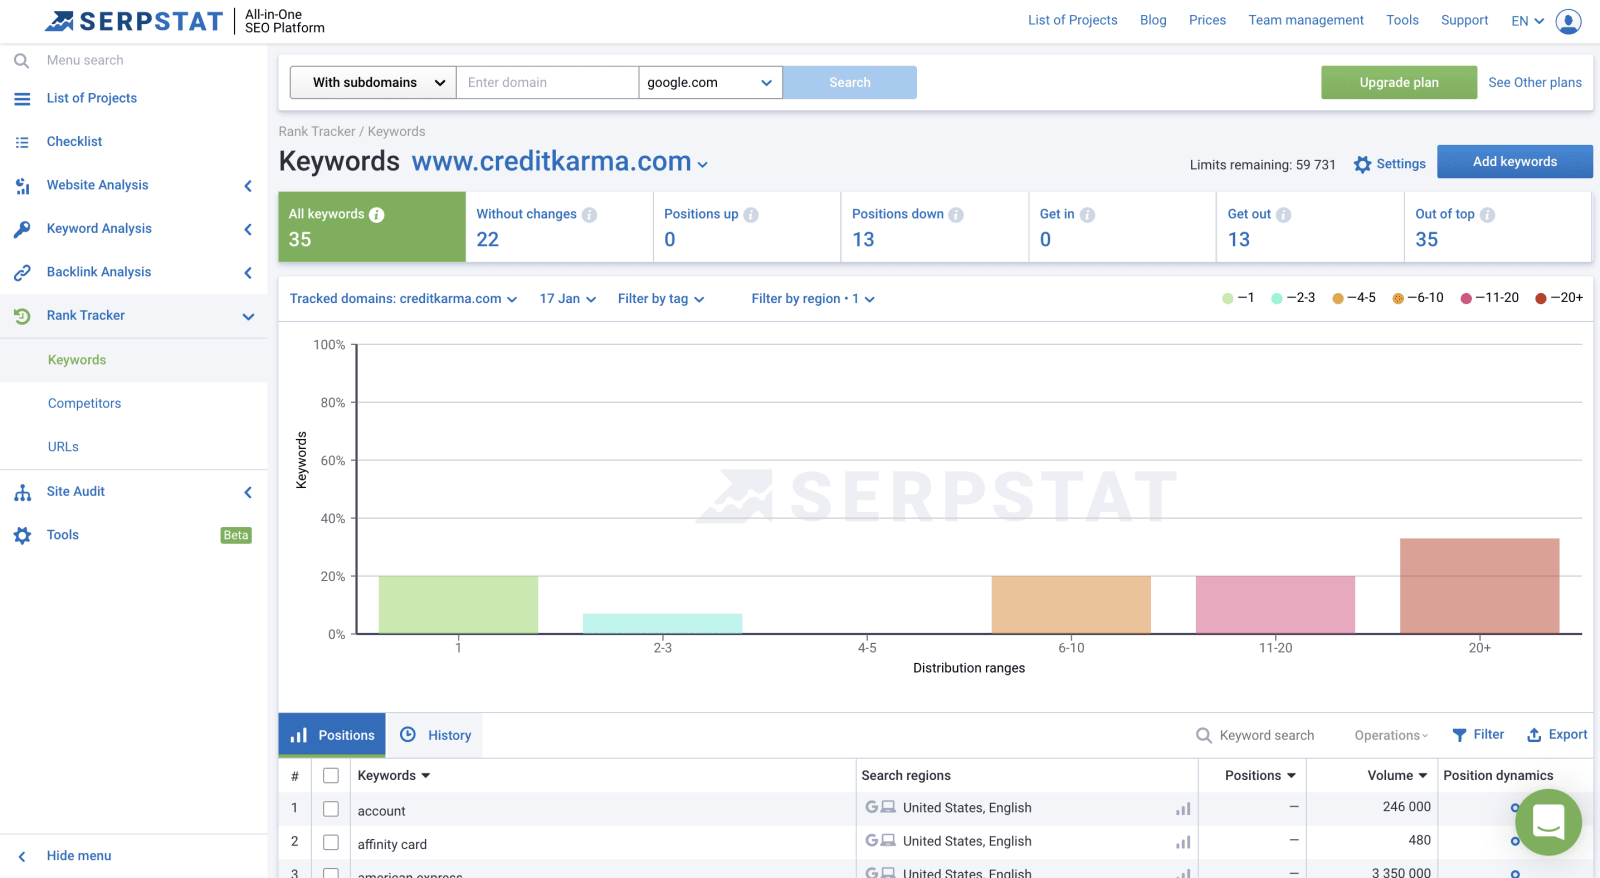 Semrush vs Serpstat: Honest Comparison After 6+ Years of Use